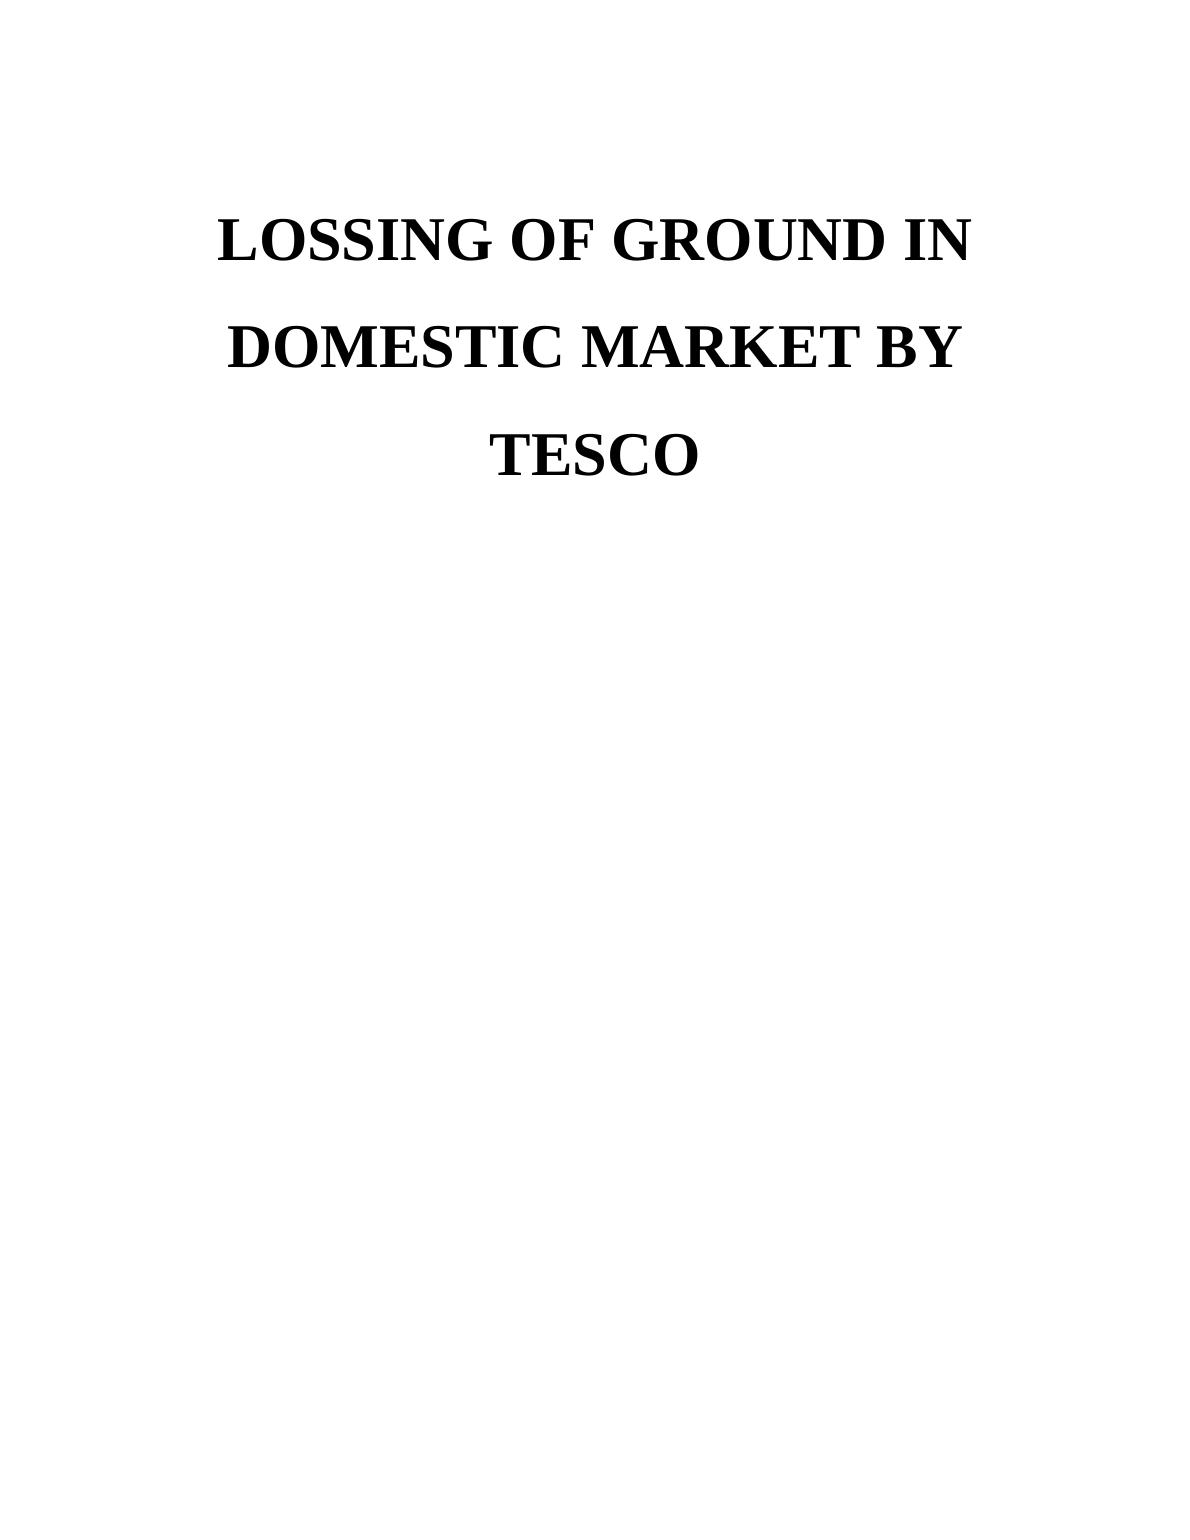 Lossing of Ground in Domestic Market by Tesco_1